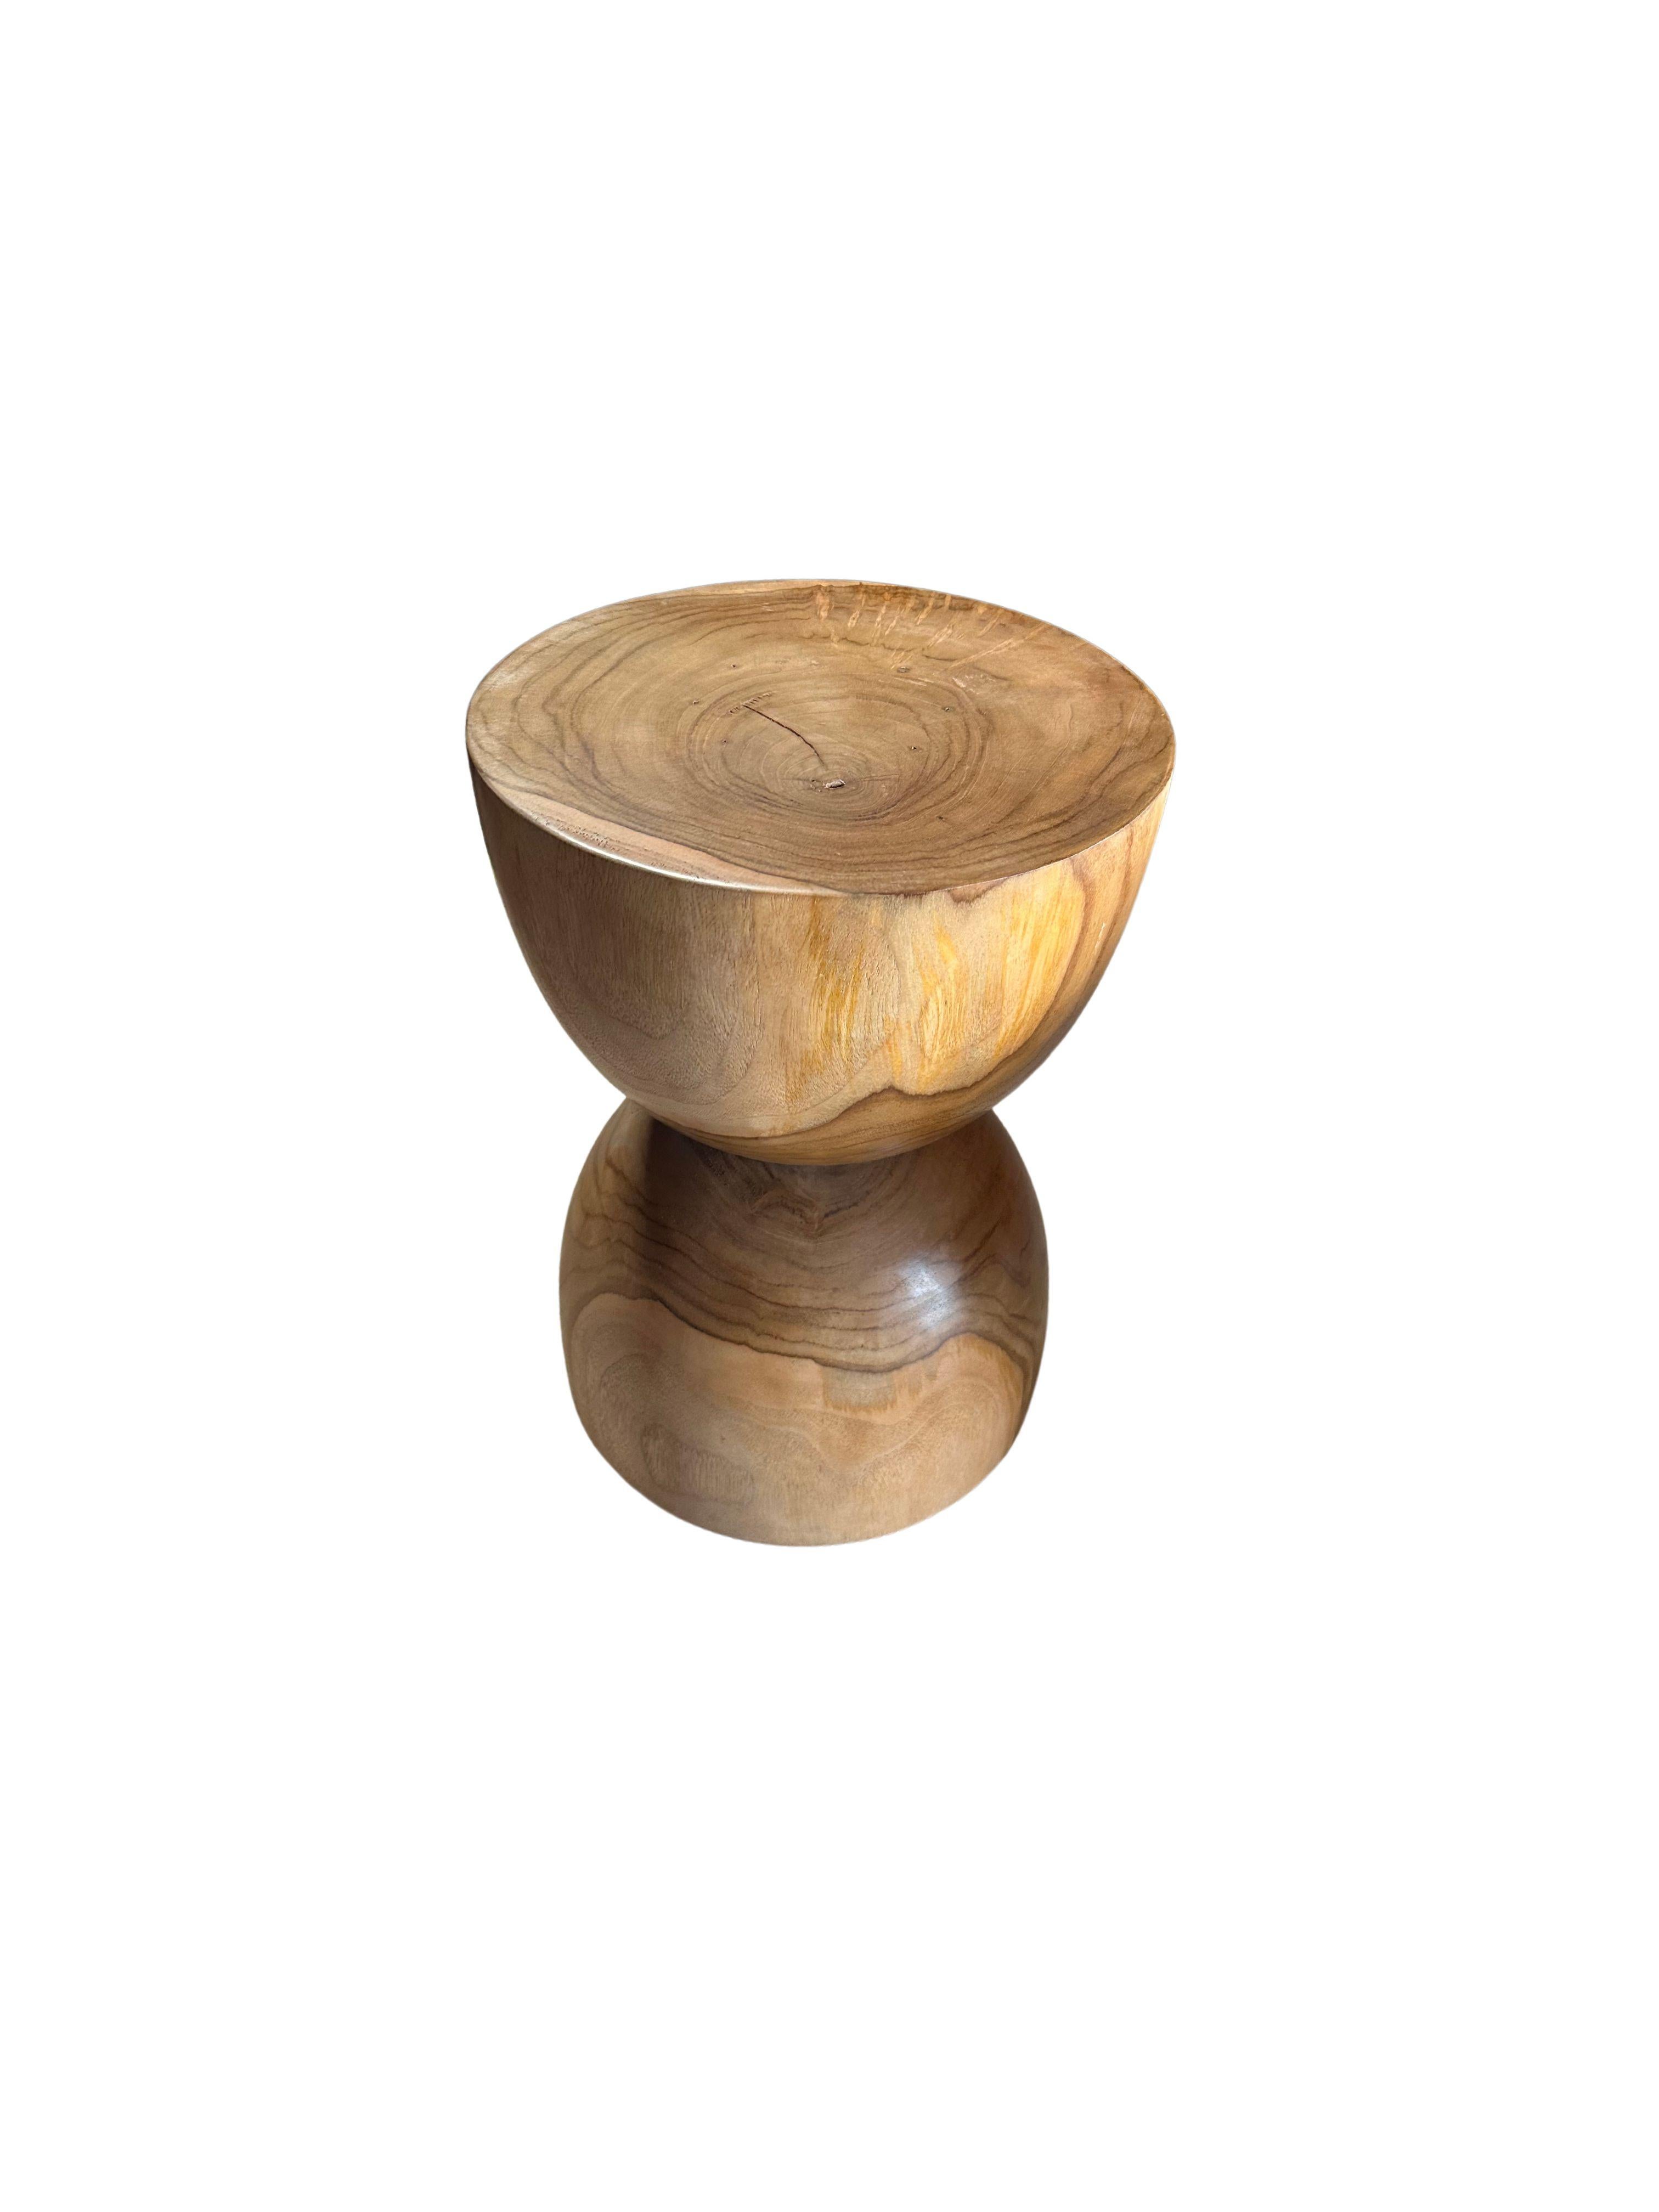 Indonesian Sculptural Teak Wood Side Table, with Stunning Wood Textures, Modern Organic For Sale